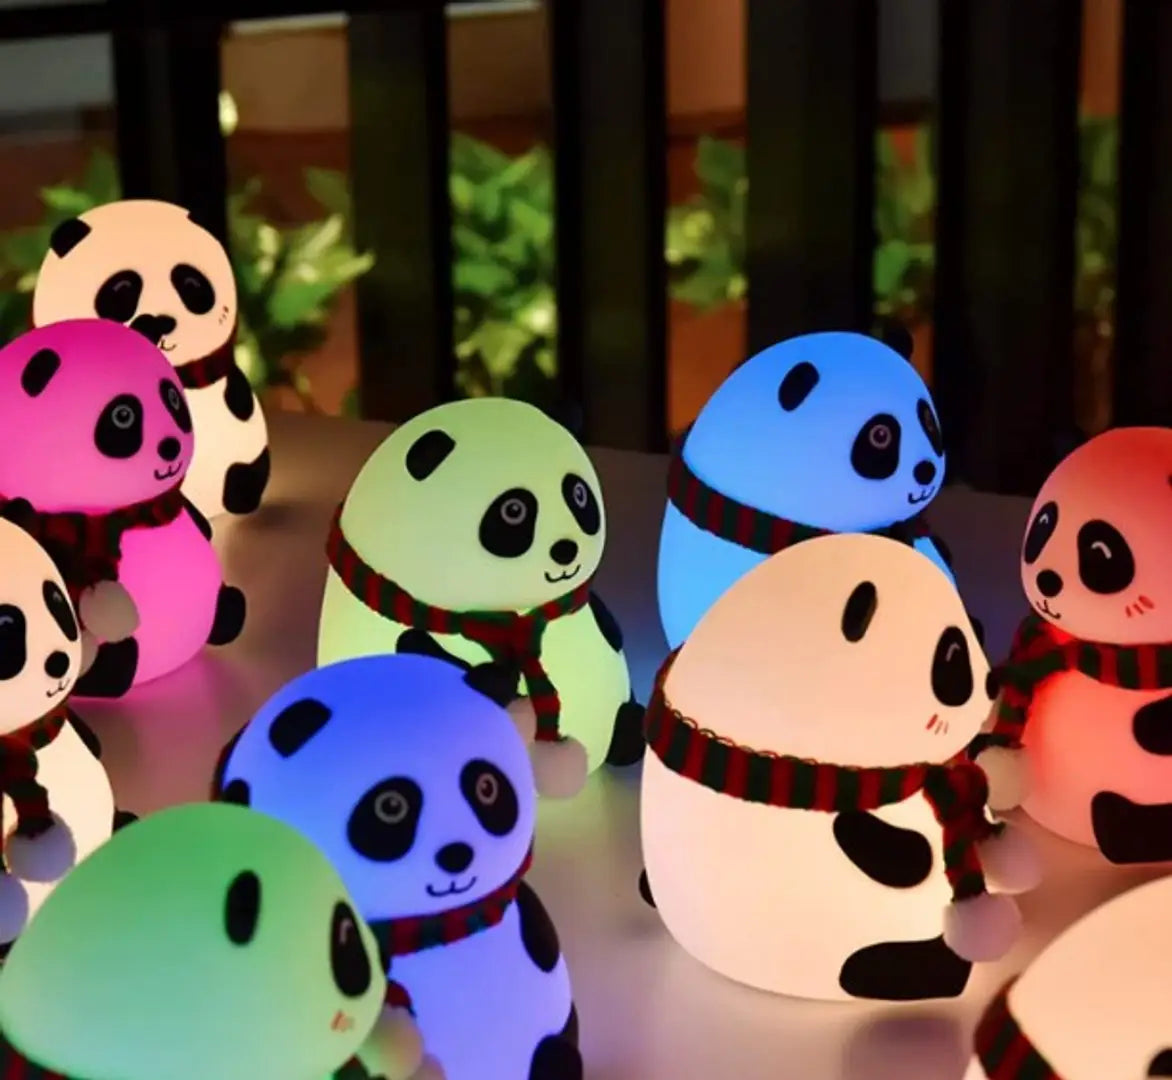 Panda touch silicone lamp